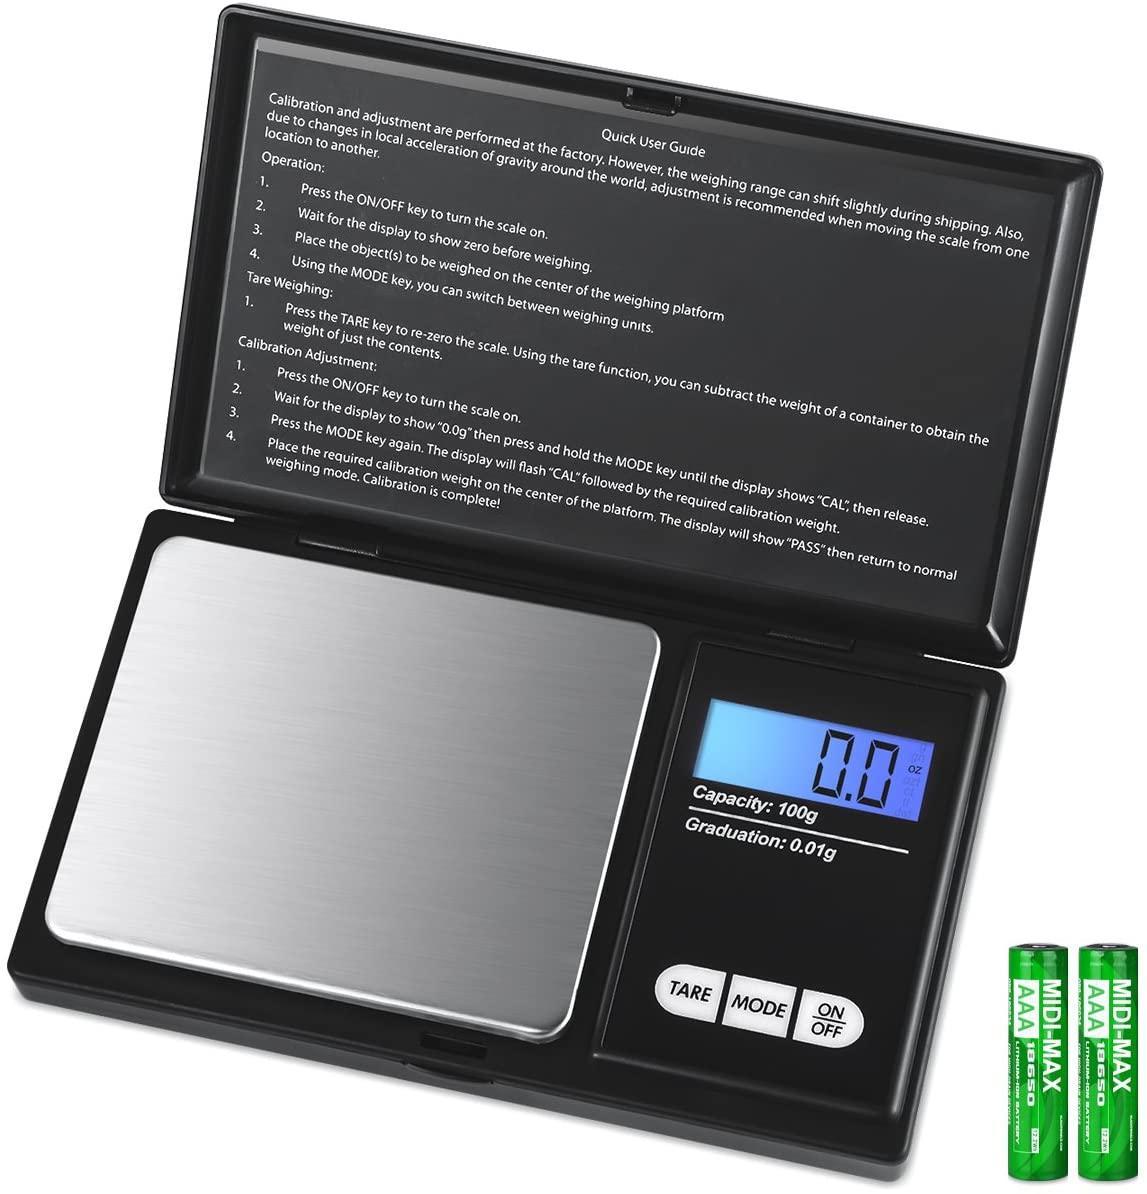 Digital Mini Scale, 100g 0.01g/ 0.001oz Pocket Jewelry Scale, Electronic Smart Scale with 7 Units, LCD Backlit Display, Tare Function, Auto Off, Stainless Steel & Slim Design(Battery Included)